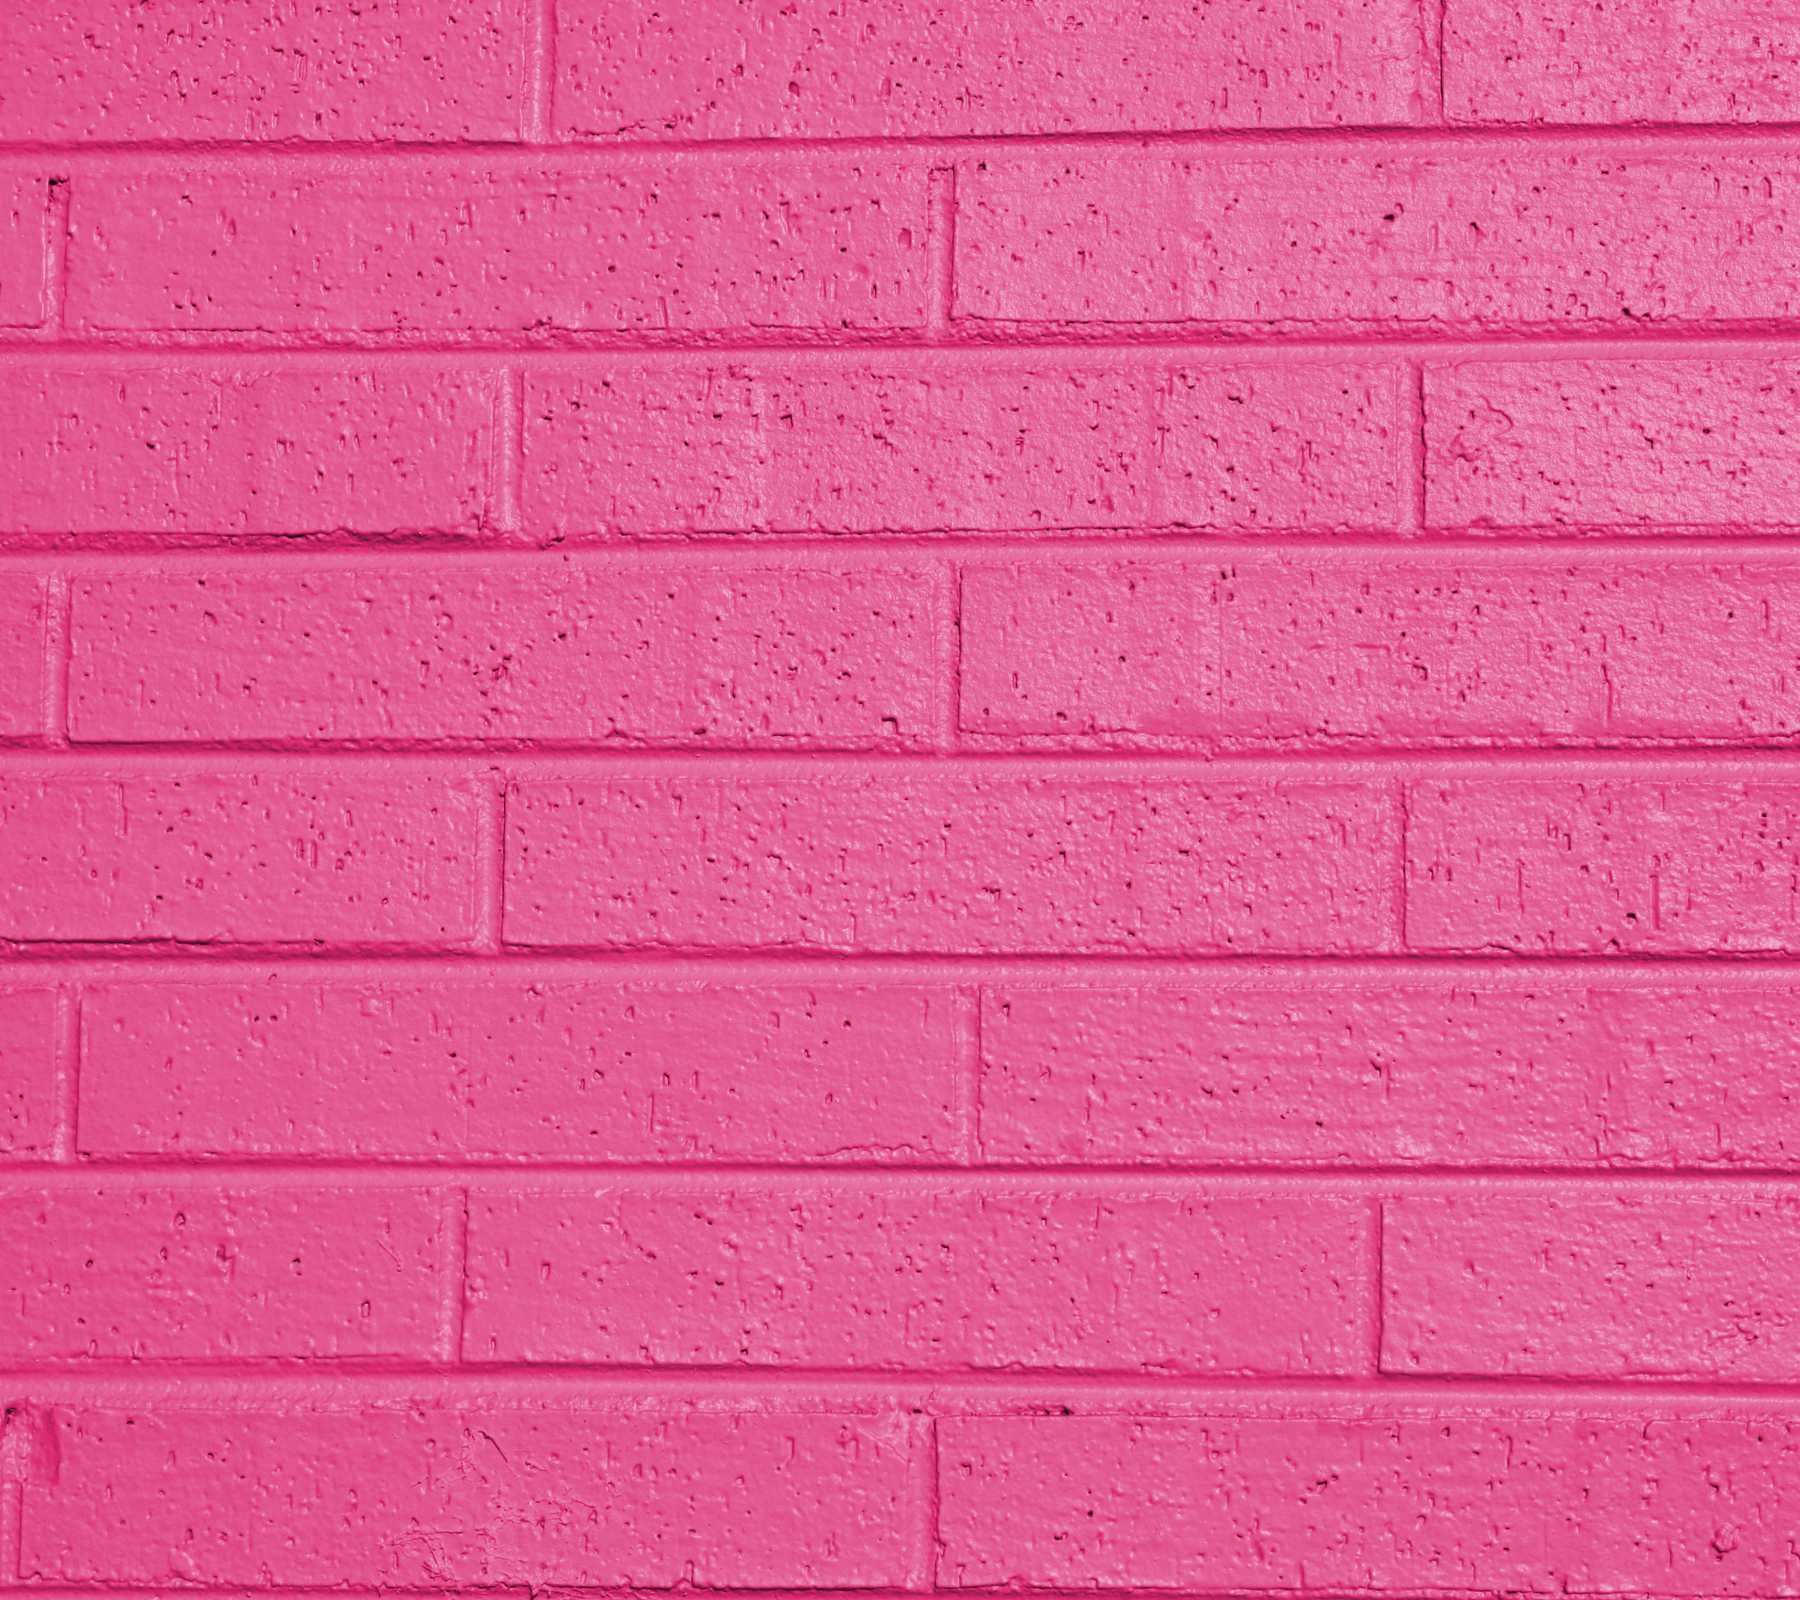 simple pink background wallpaper